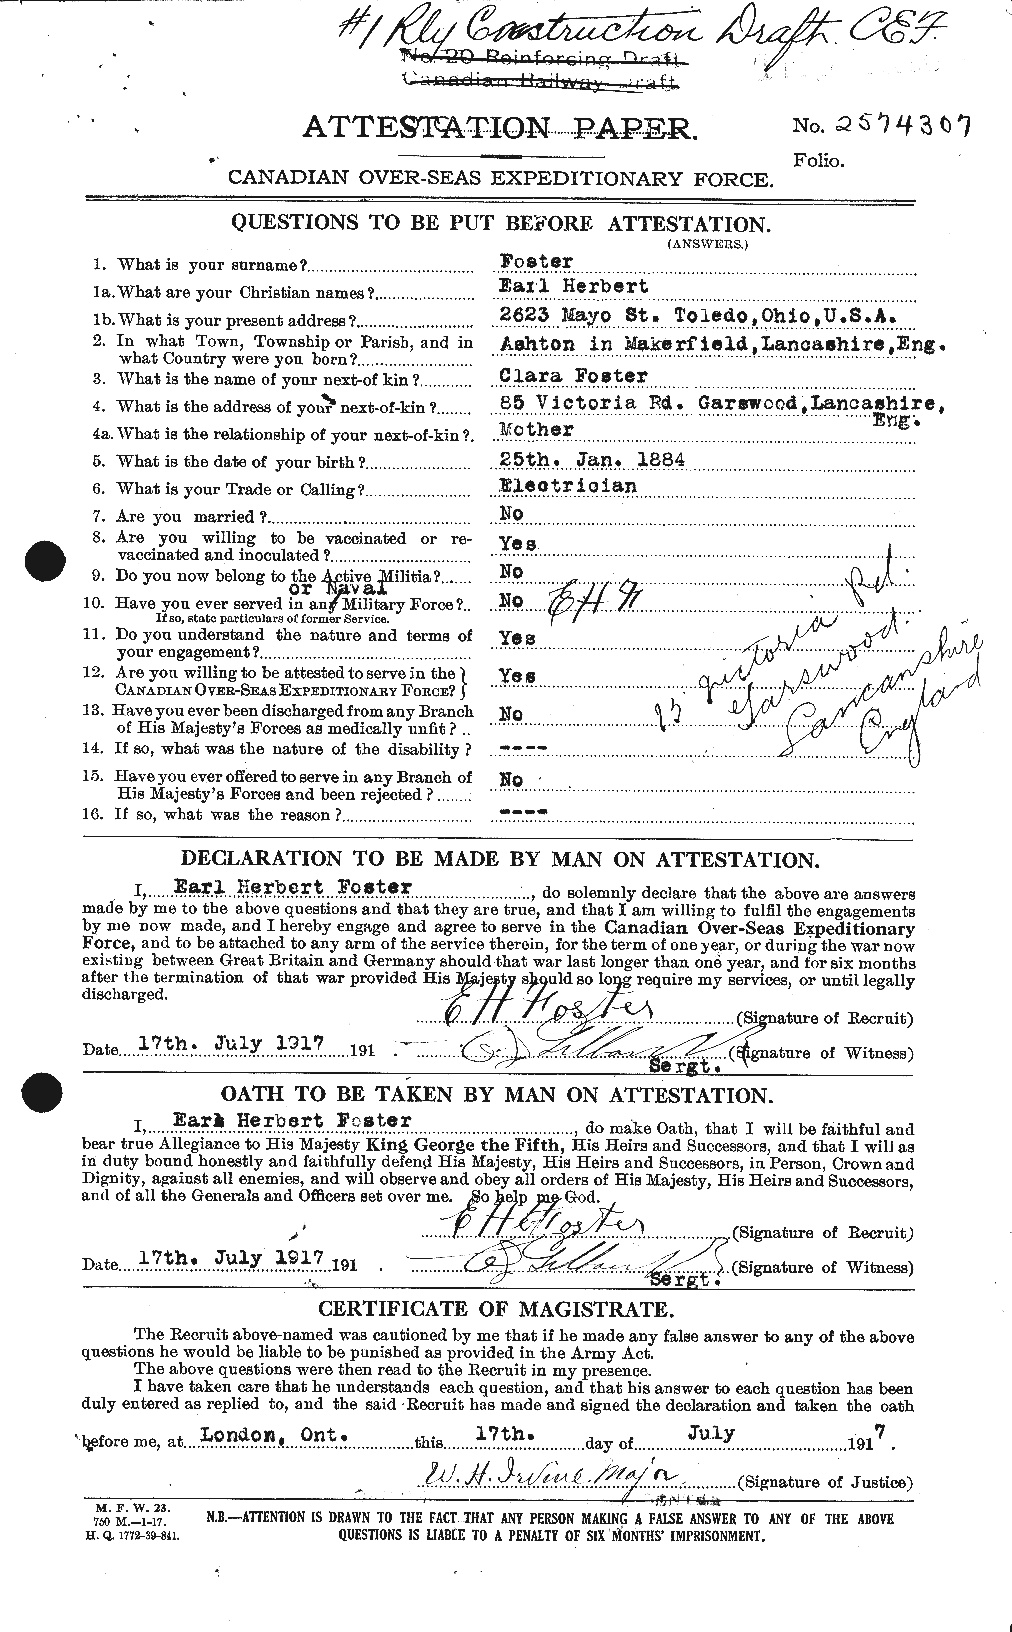 Personnel Records of the First World War - CEF 330570a